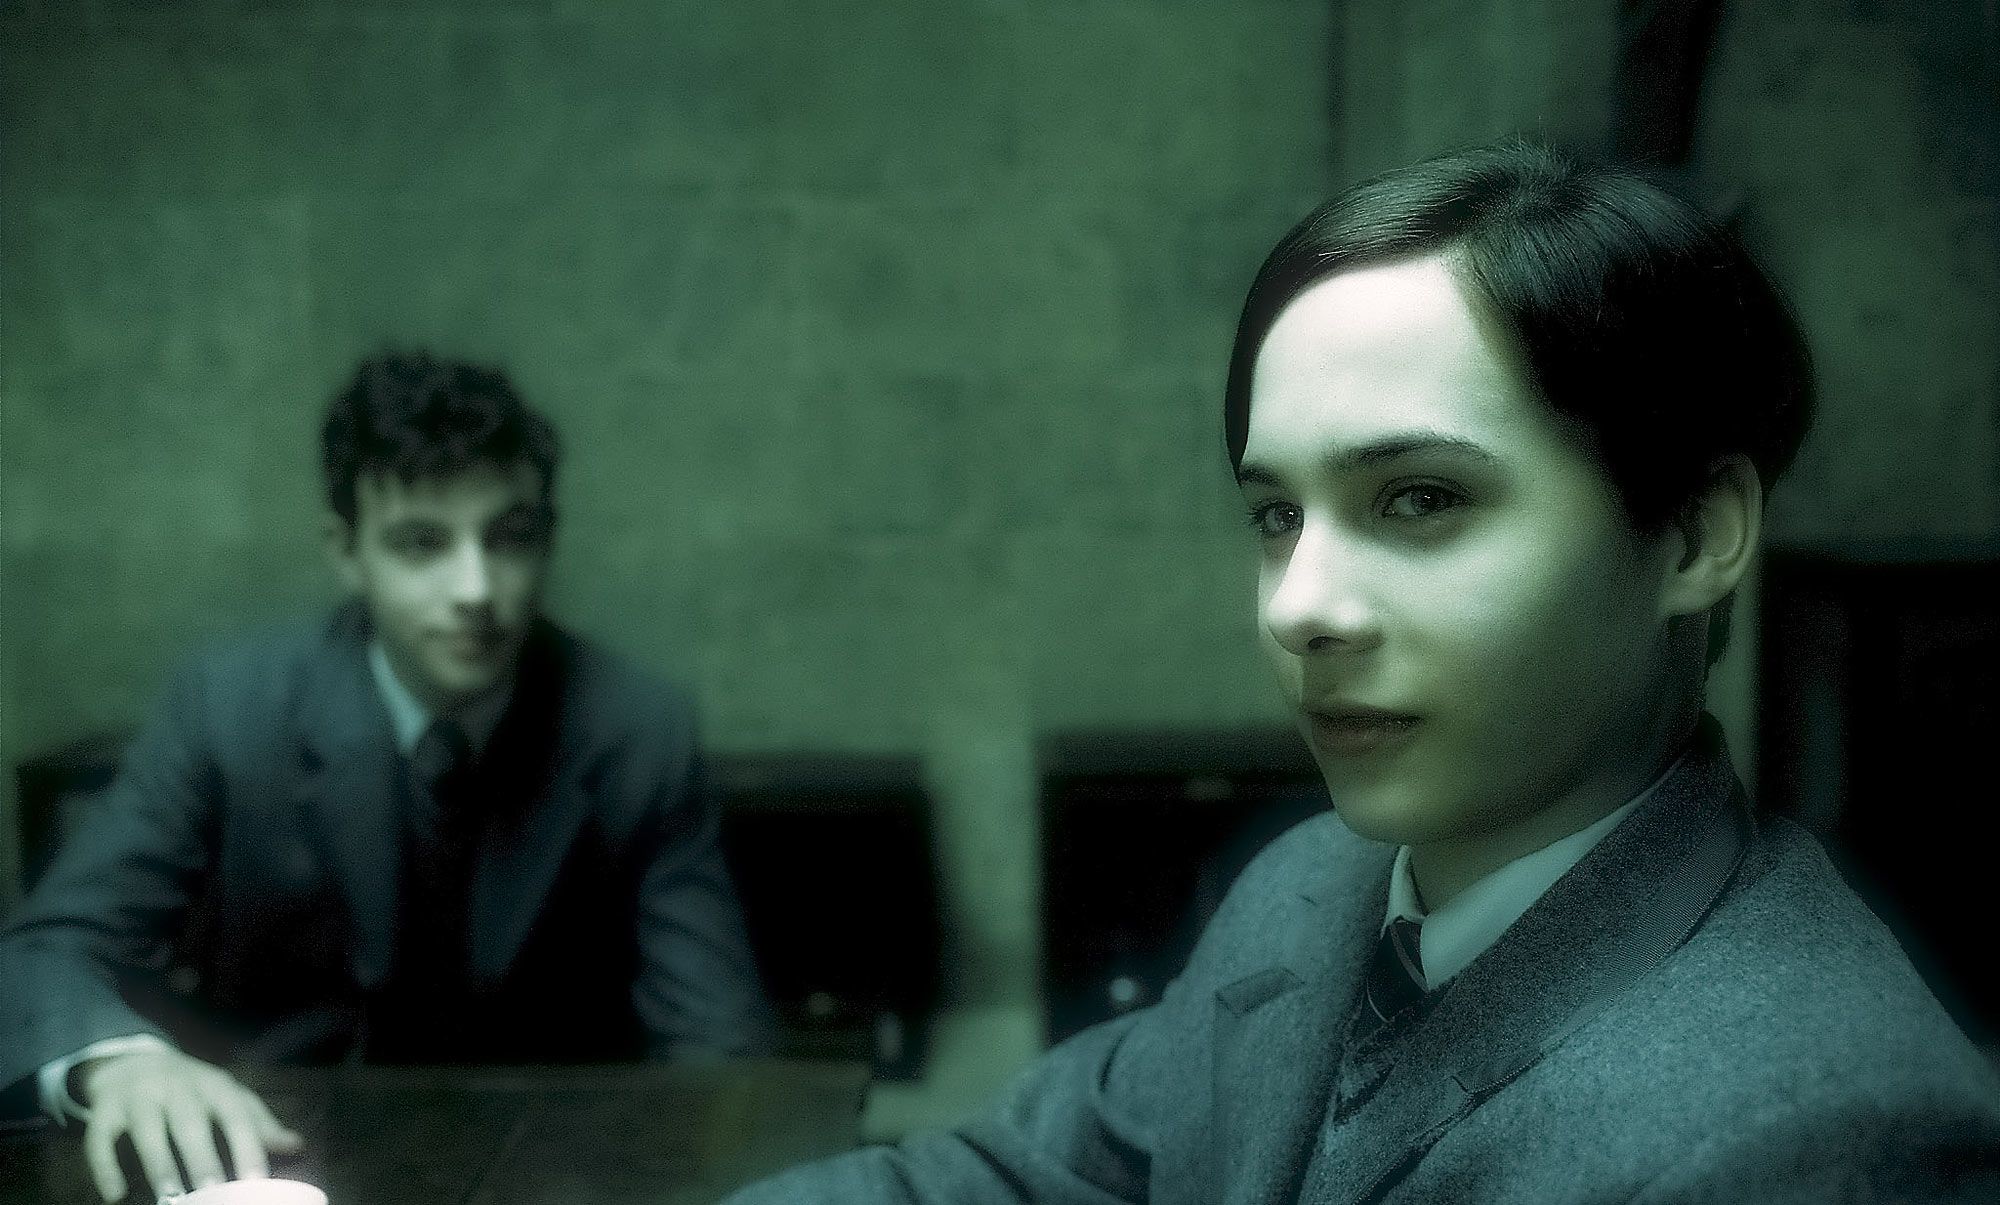 Frank Dillane as the teenage Tom Riddle